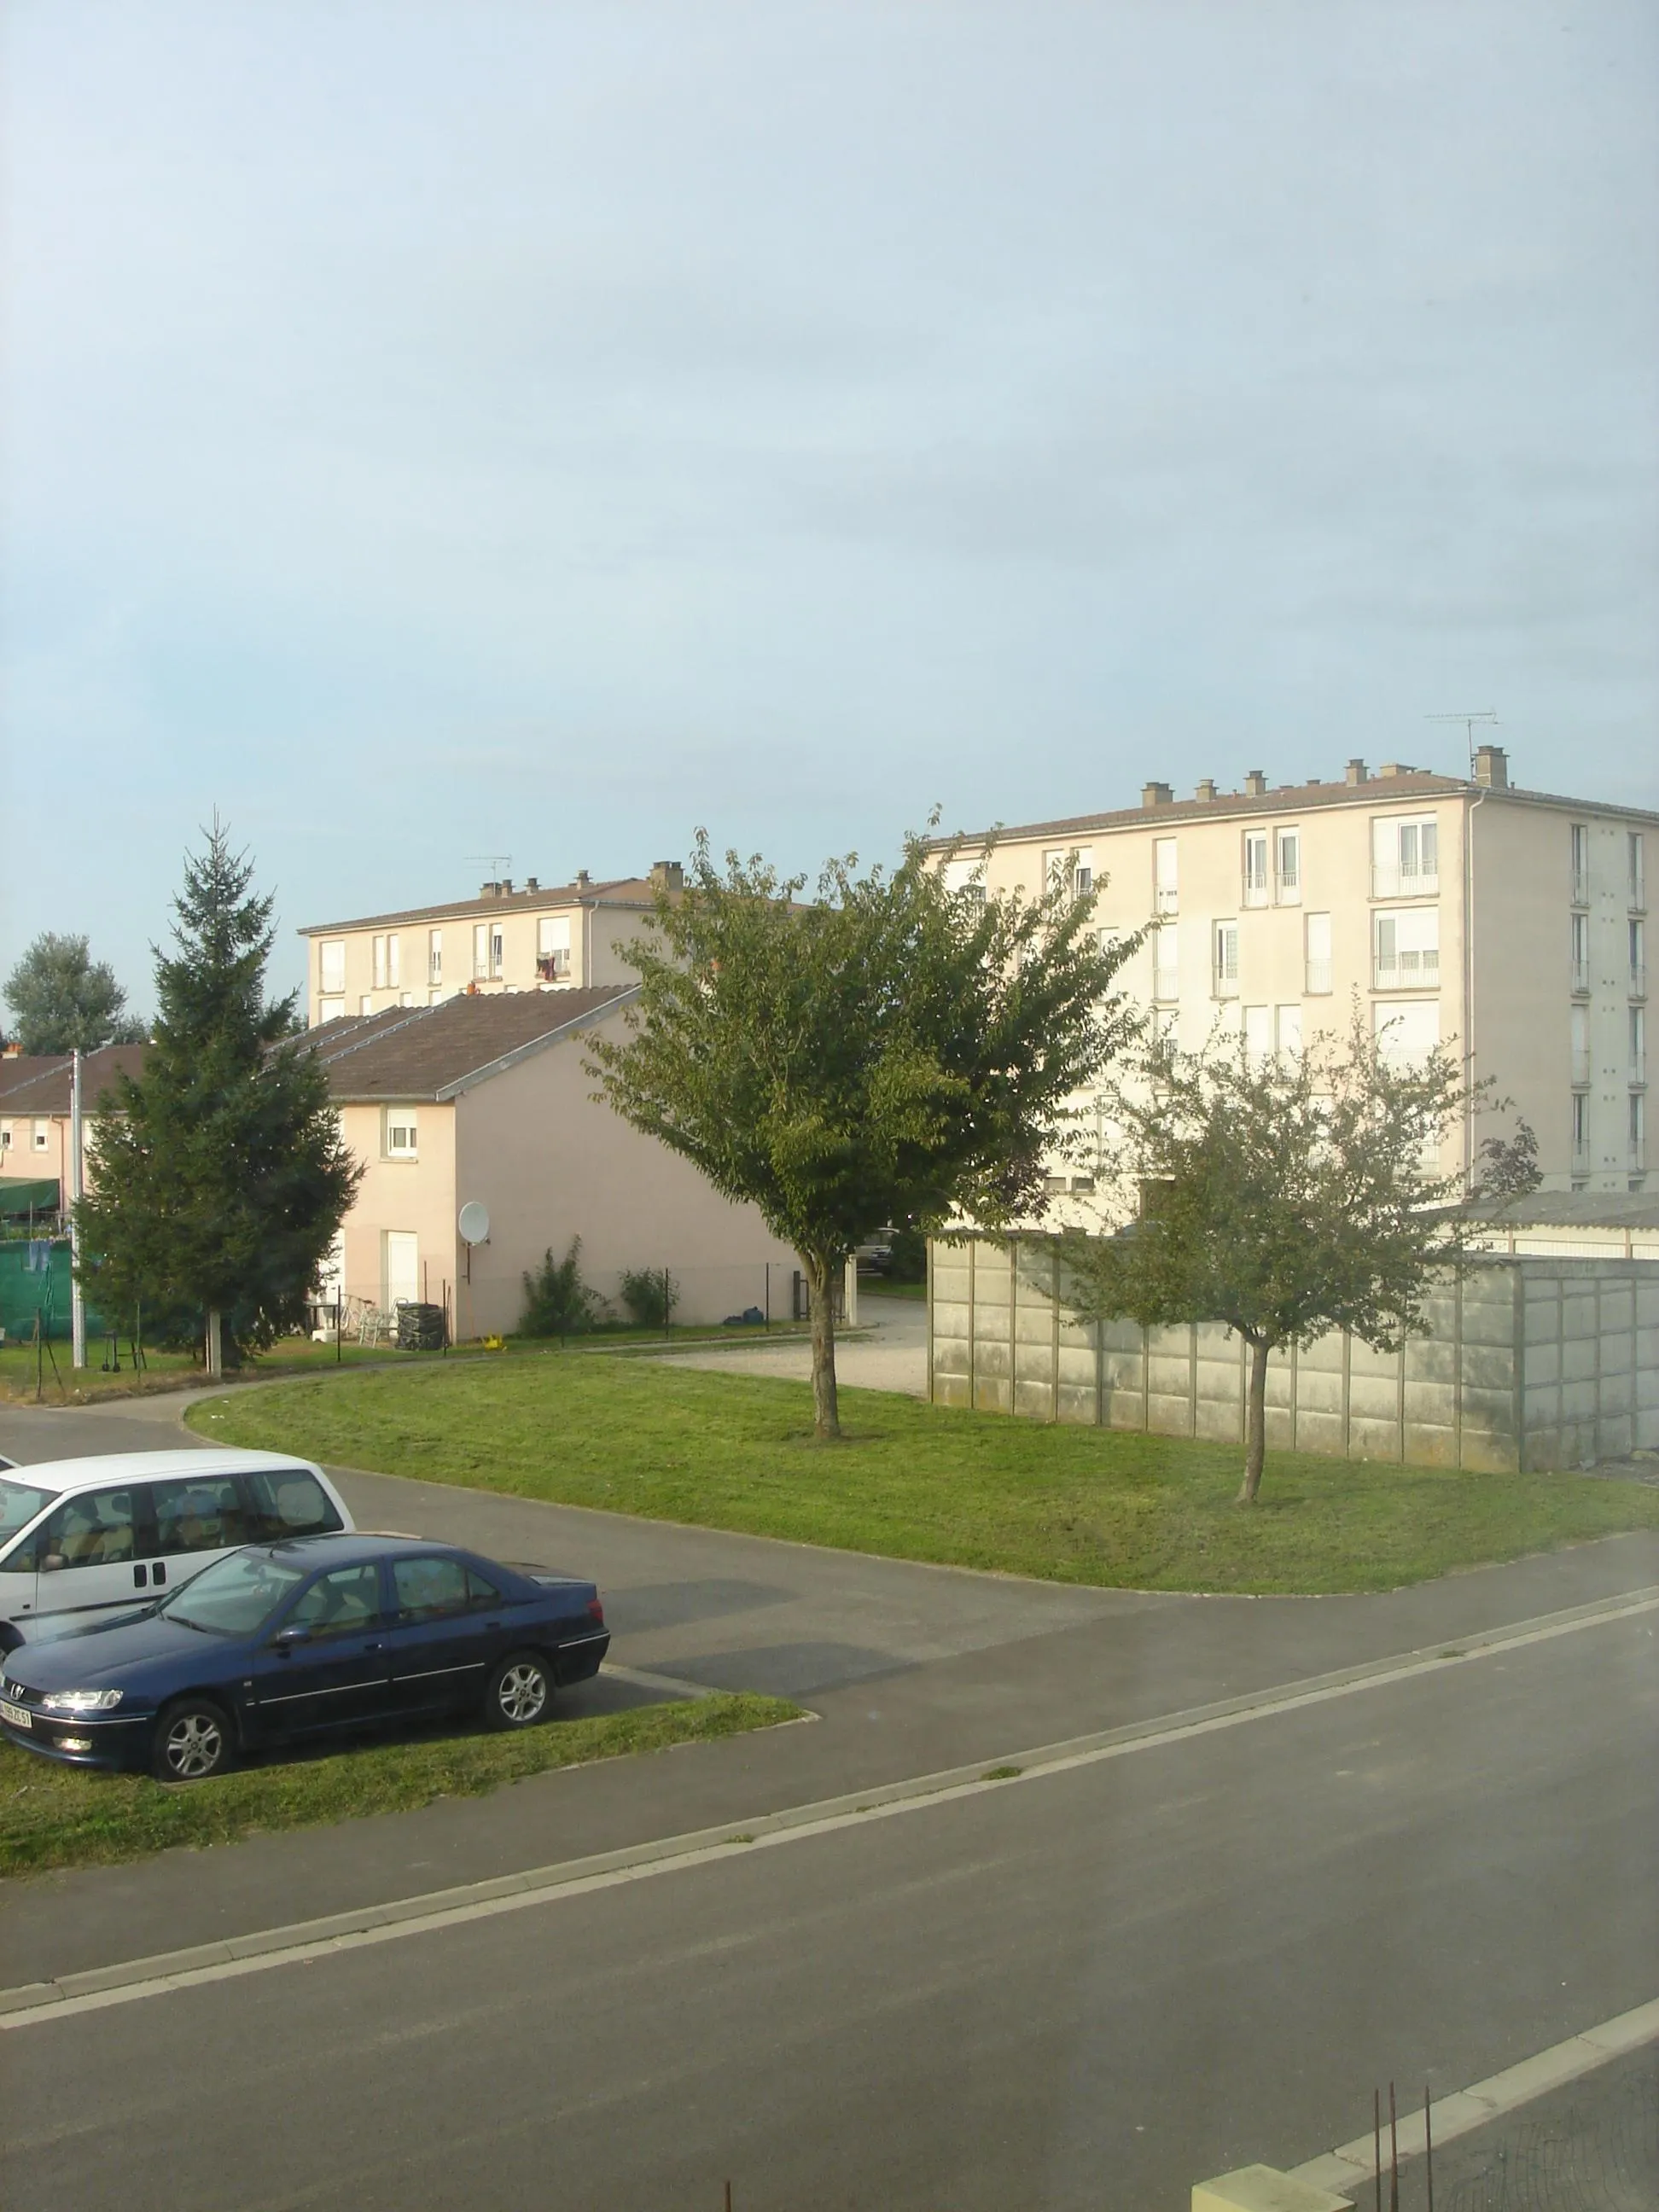 Photo showing: View of Pargny-sur-Saulx, France